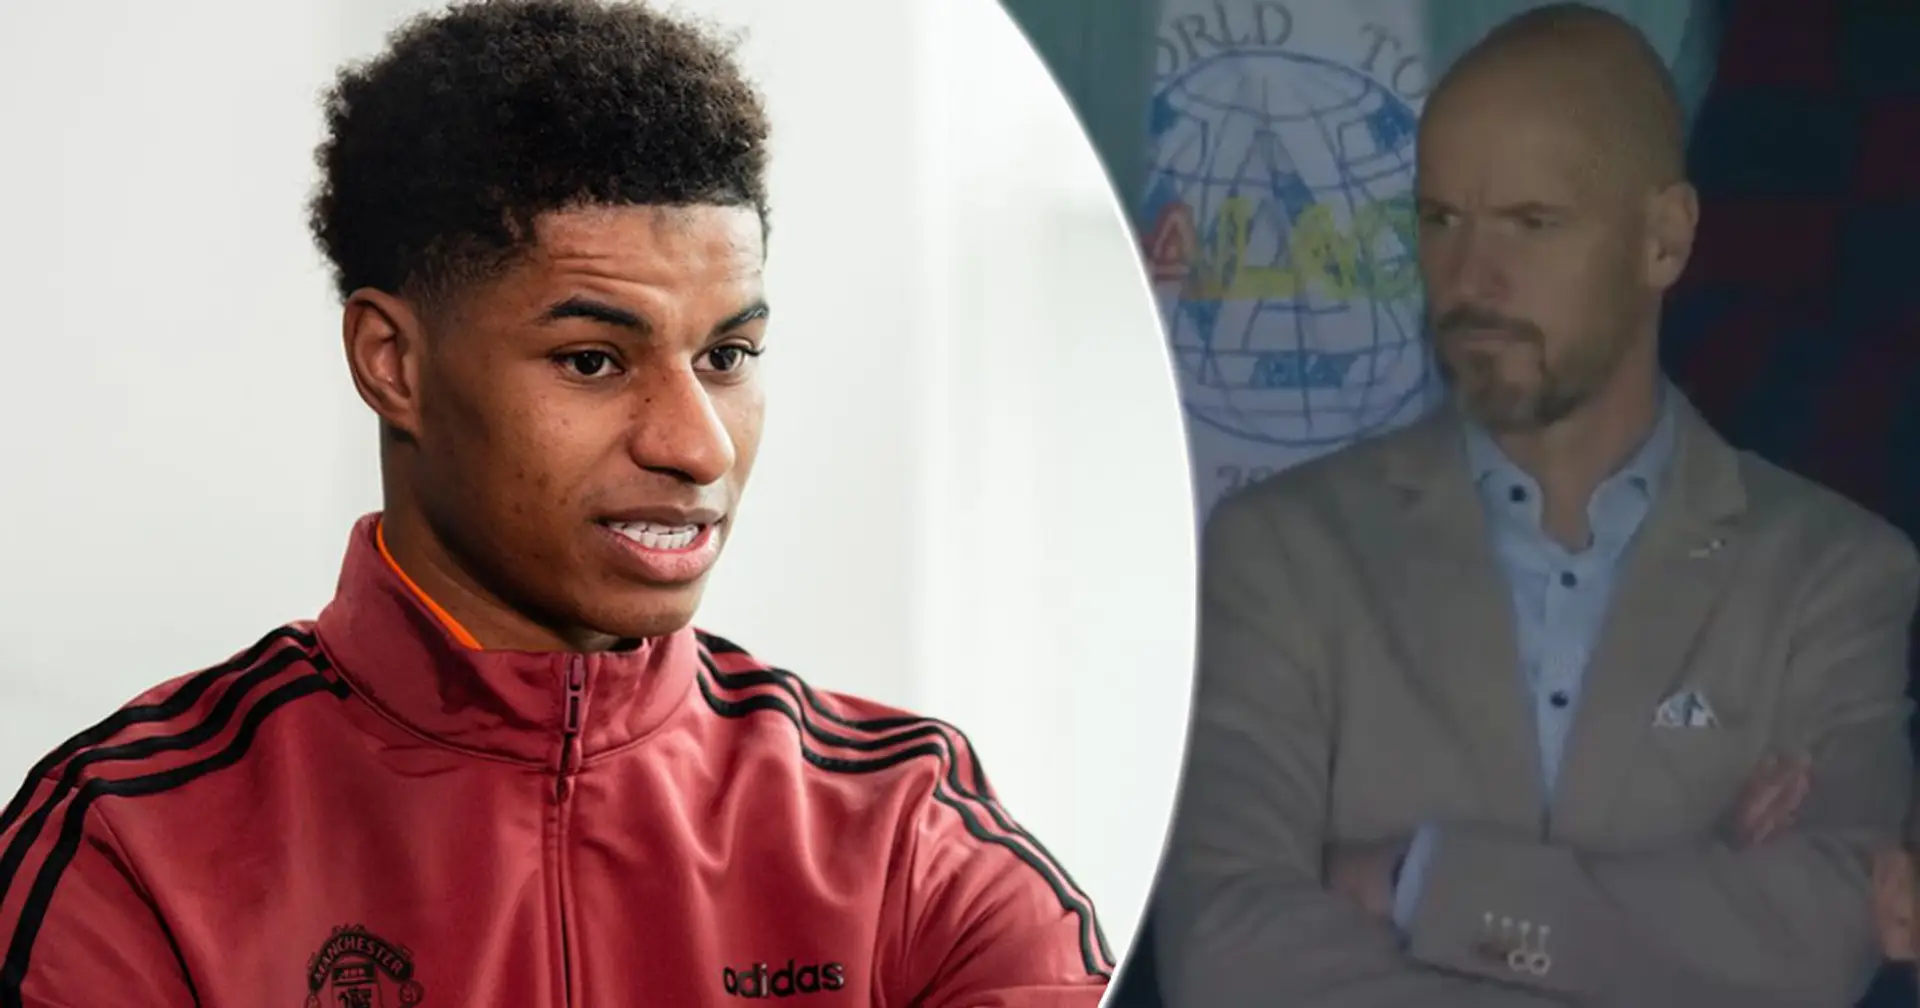 'It'll be obvious to see': Rashford tips Ten Hag to bring major changes to United next season